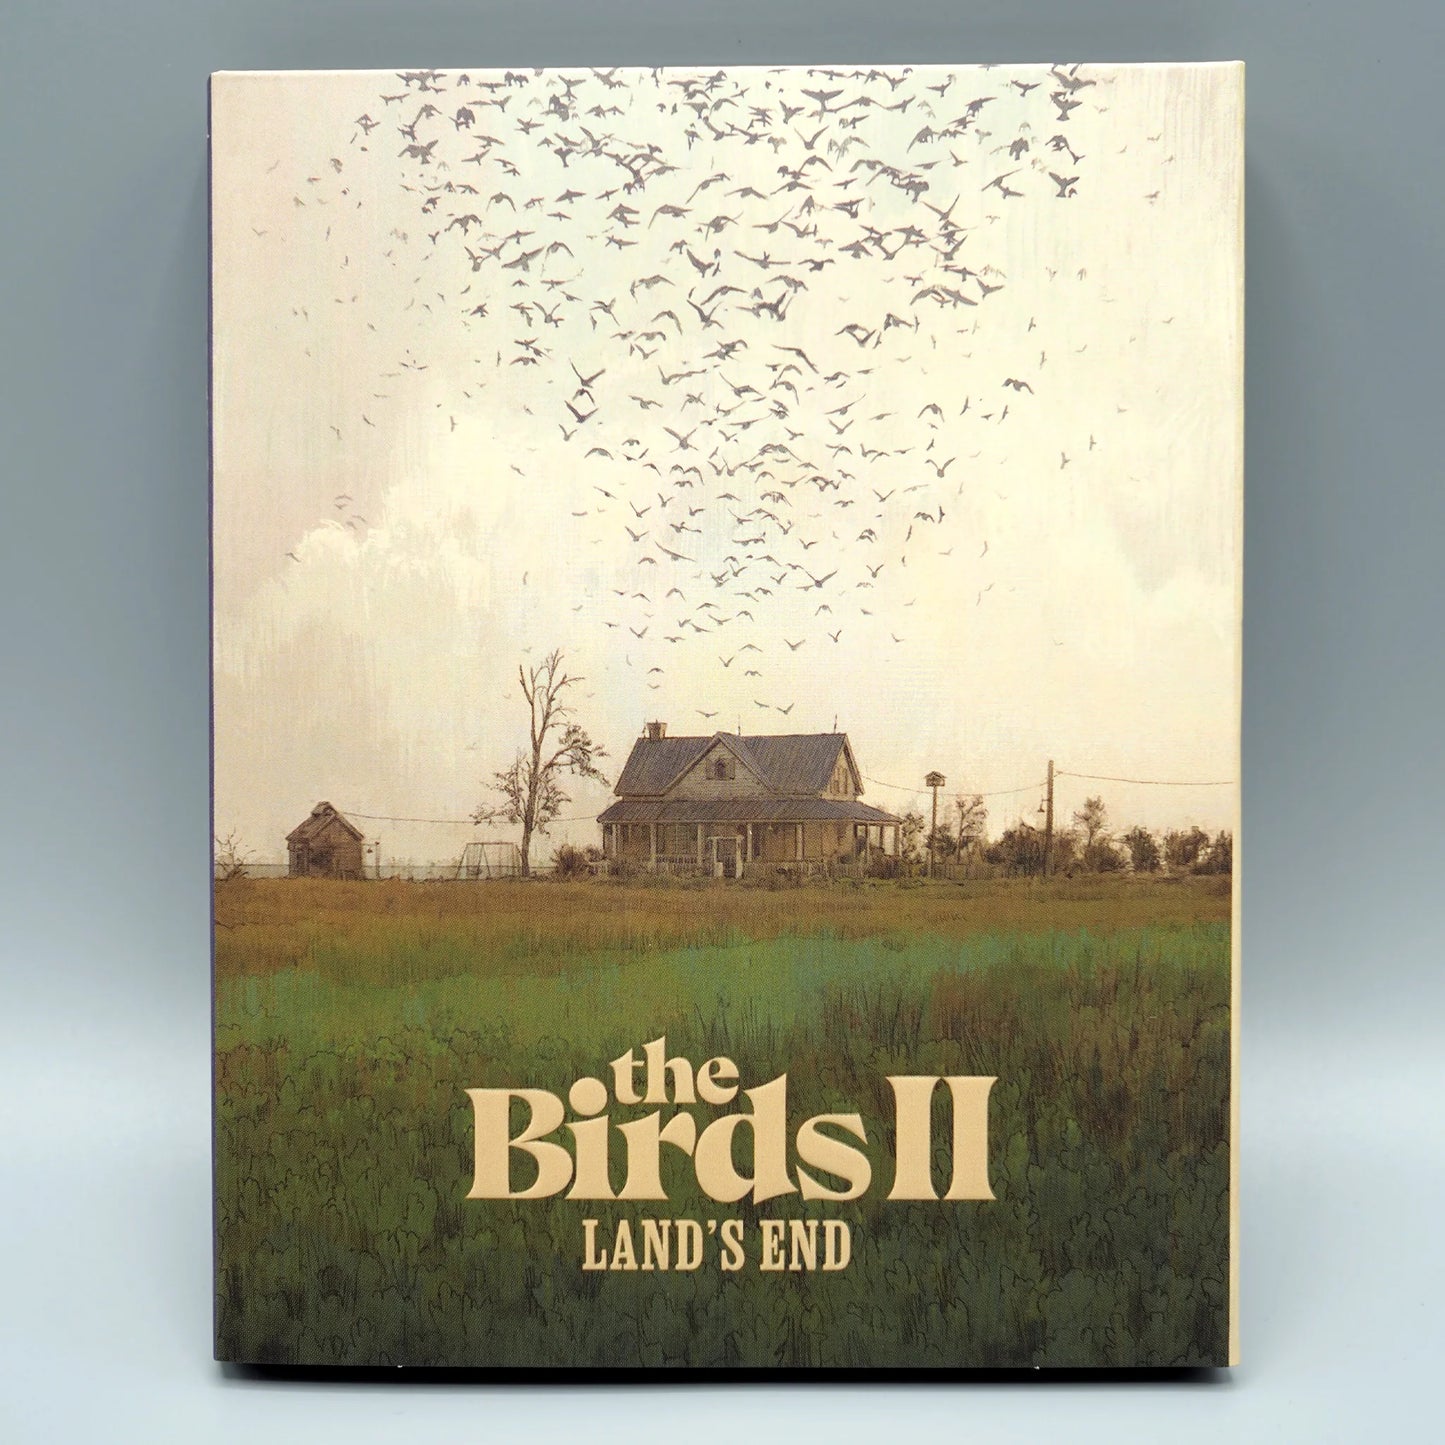 The Birds II: Land's End Blu-ray with Limited Edition Slipcover (VInegar Syndrome)